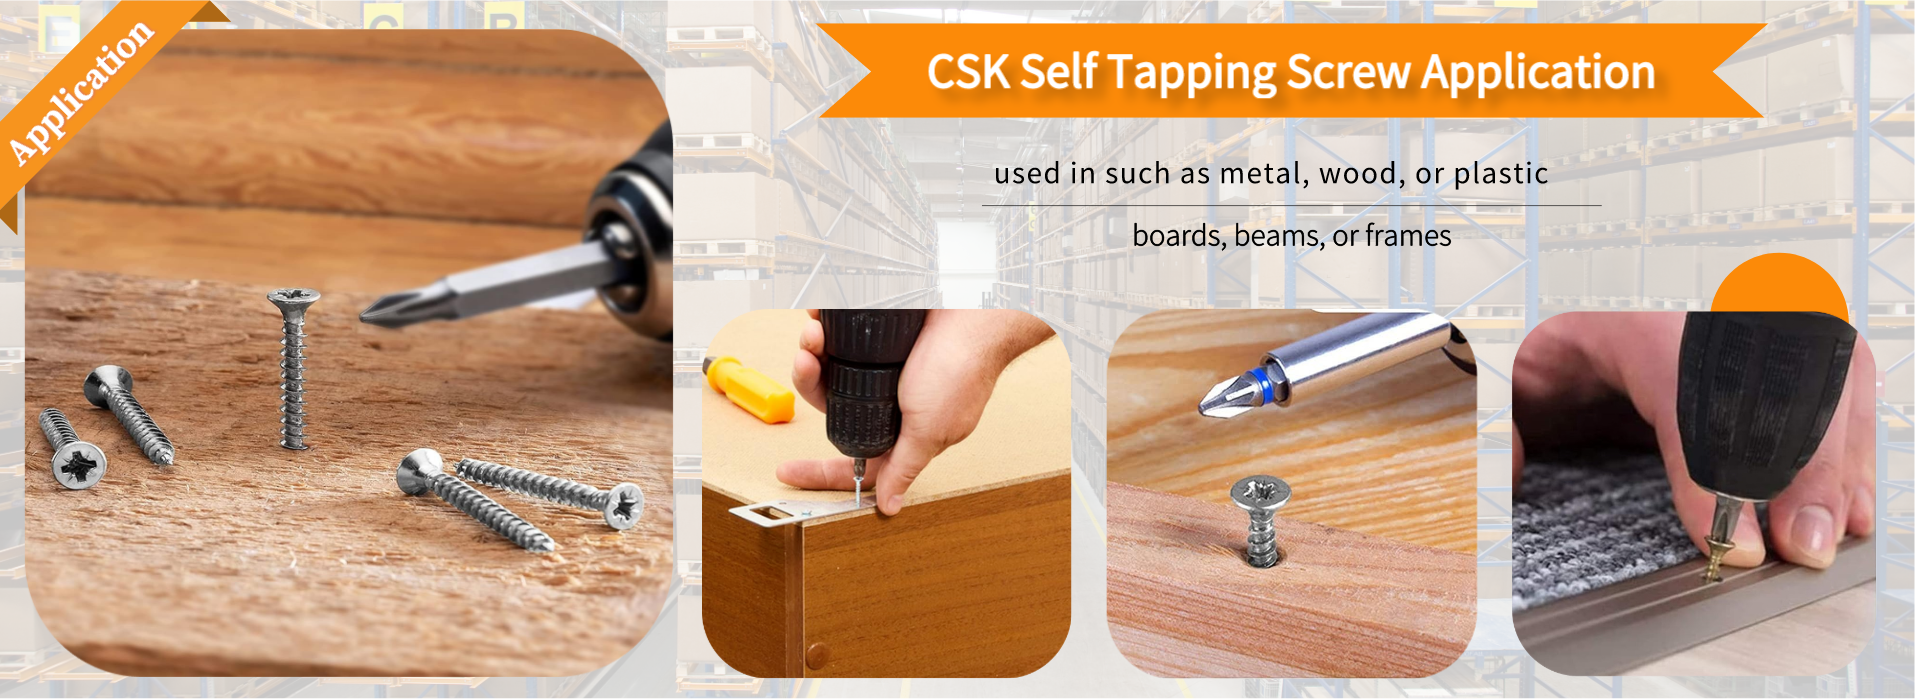 CSK Self Tapping Screw Application